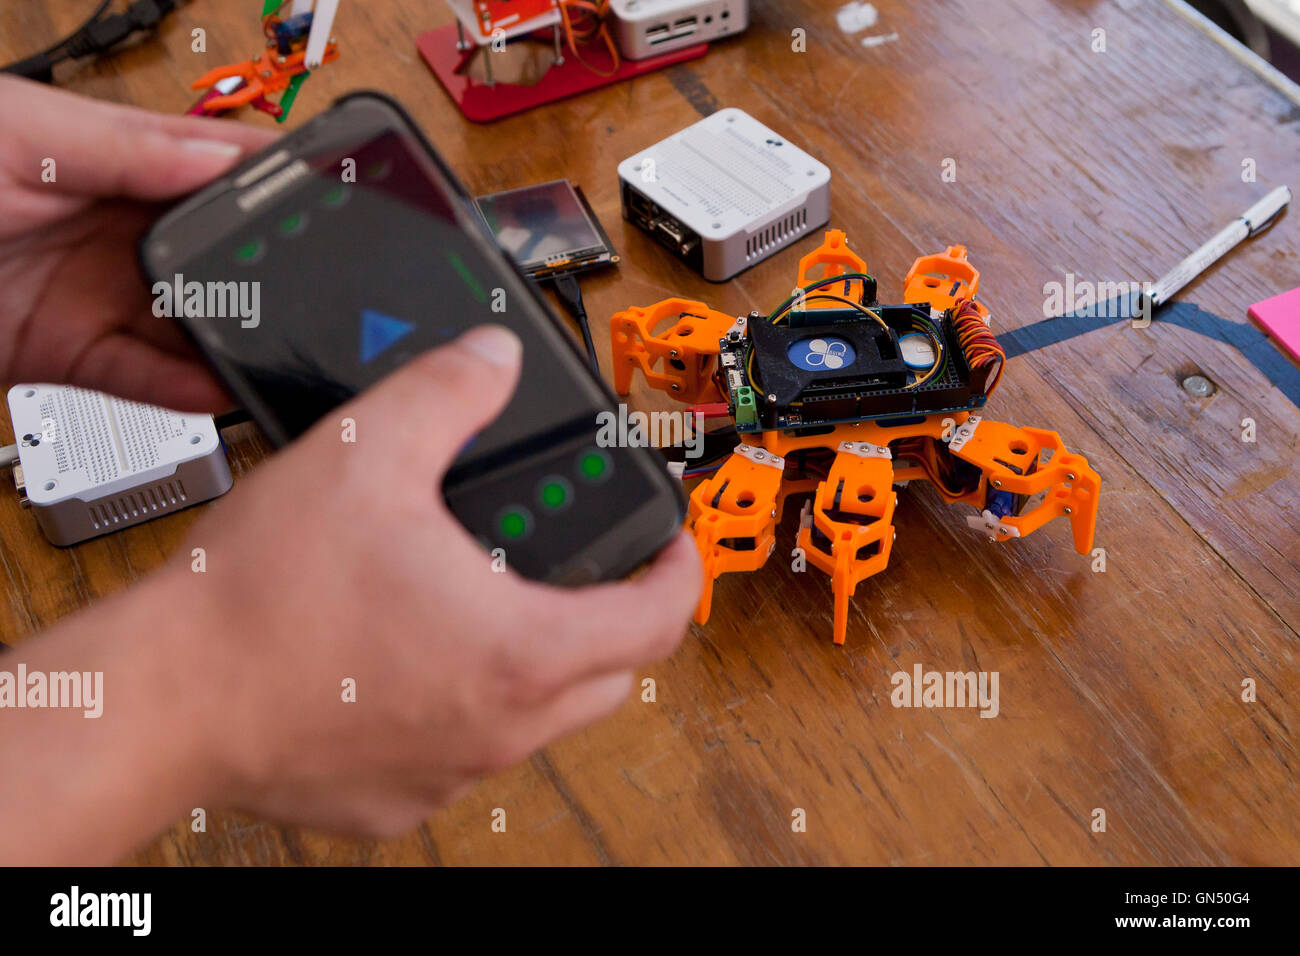 Man controlling toy robot with mobile phone ap via bluethooth - USA Stock Photo